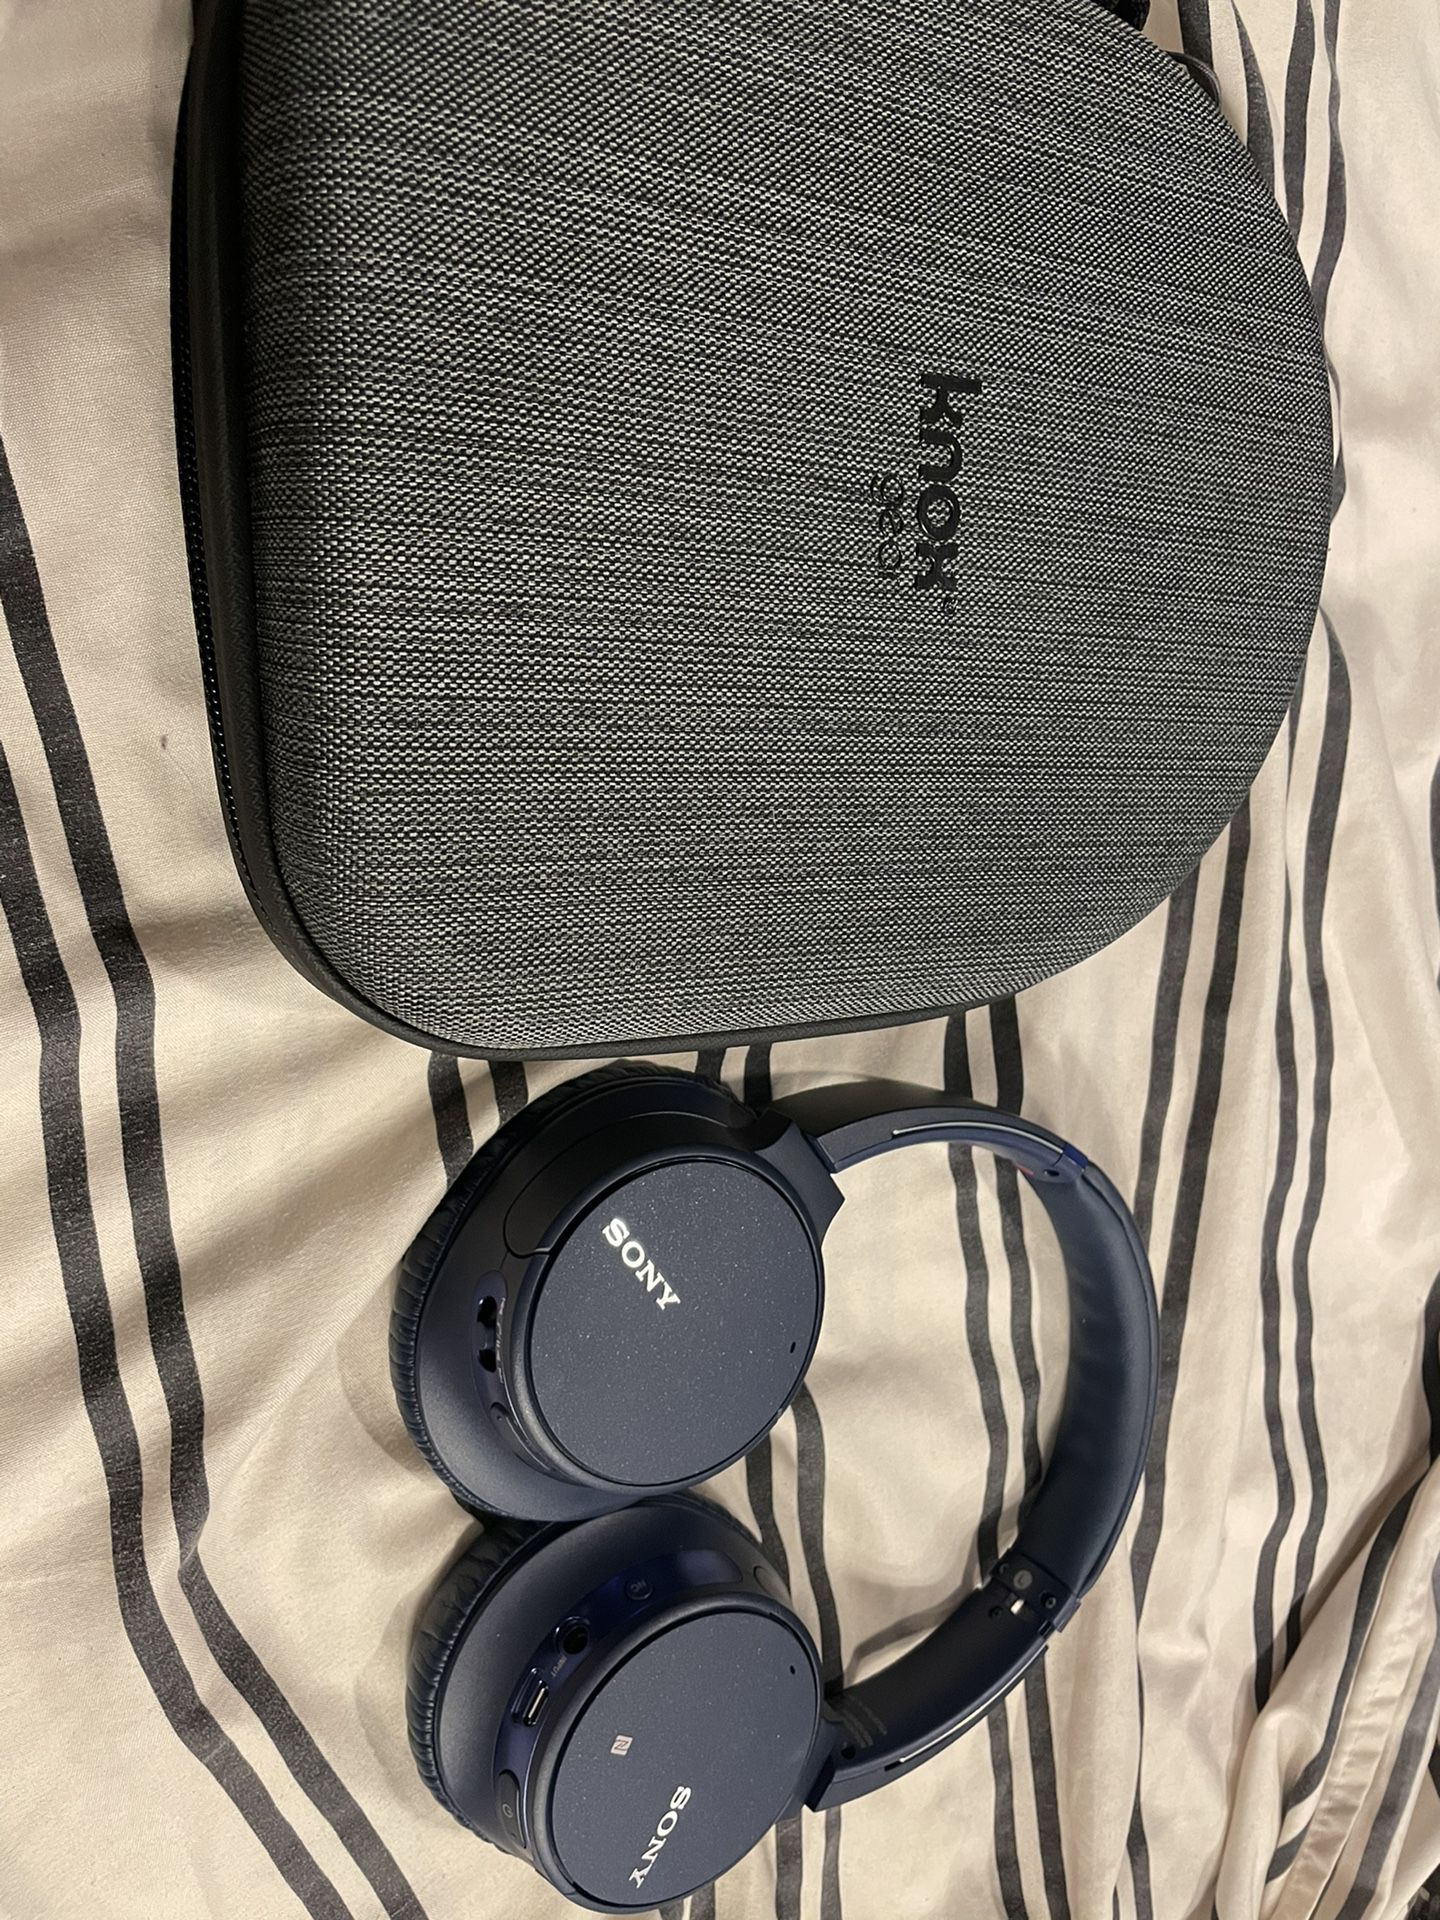 Sony WH-CH700N headphones ( trade for airpods pro )